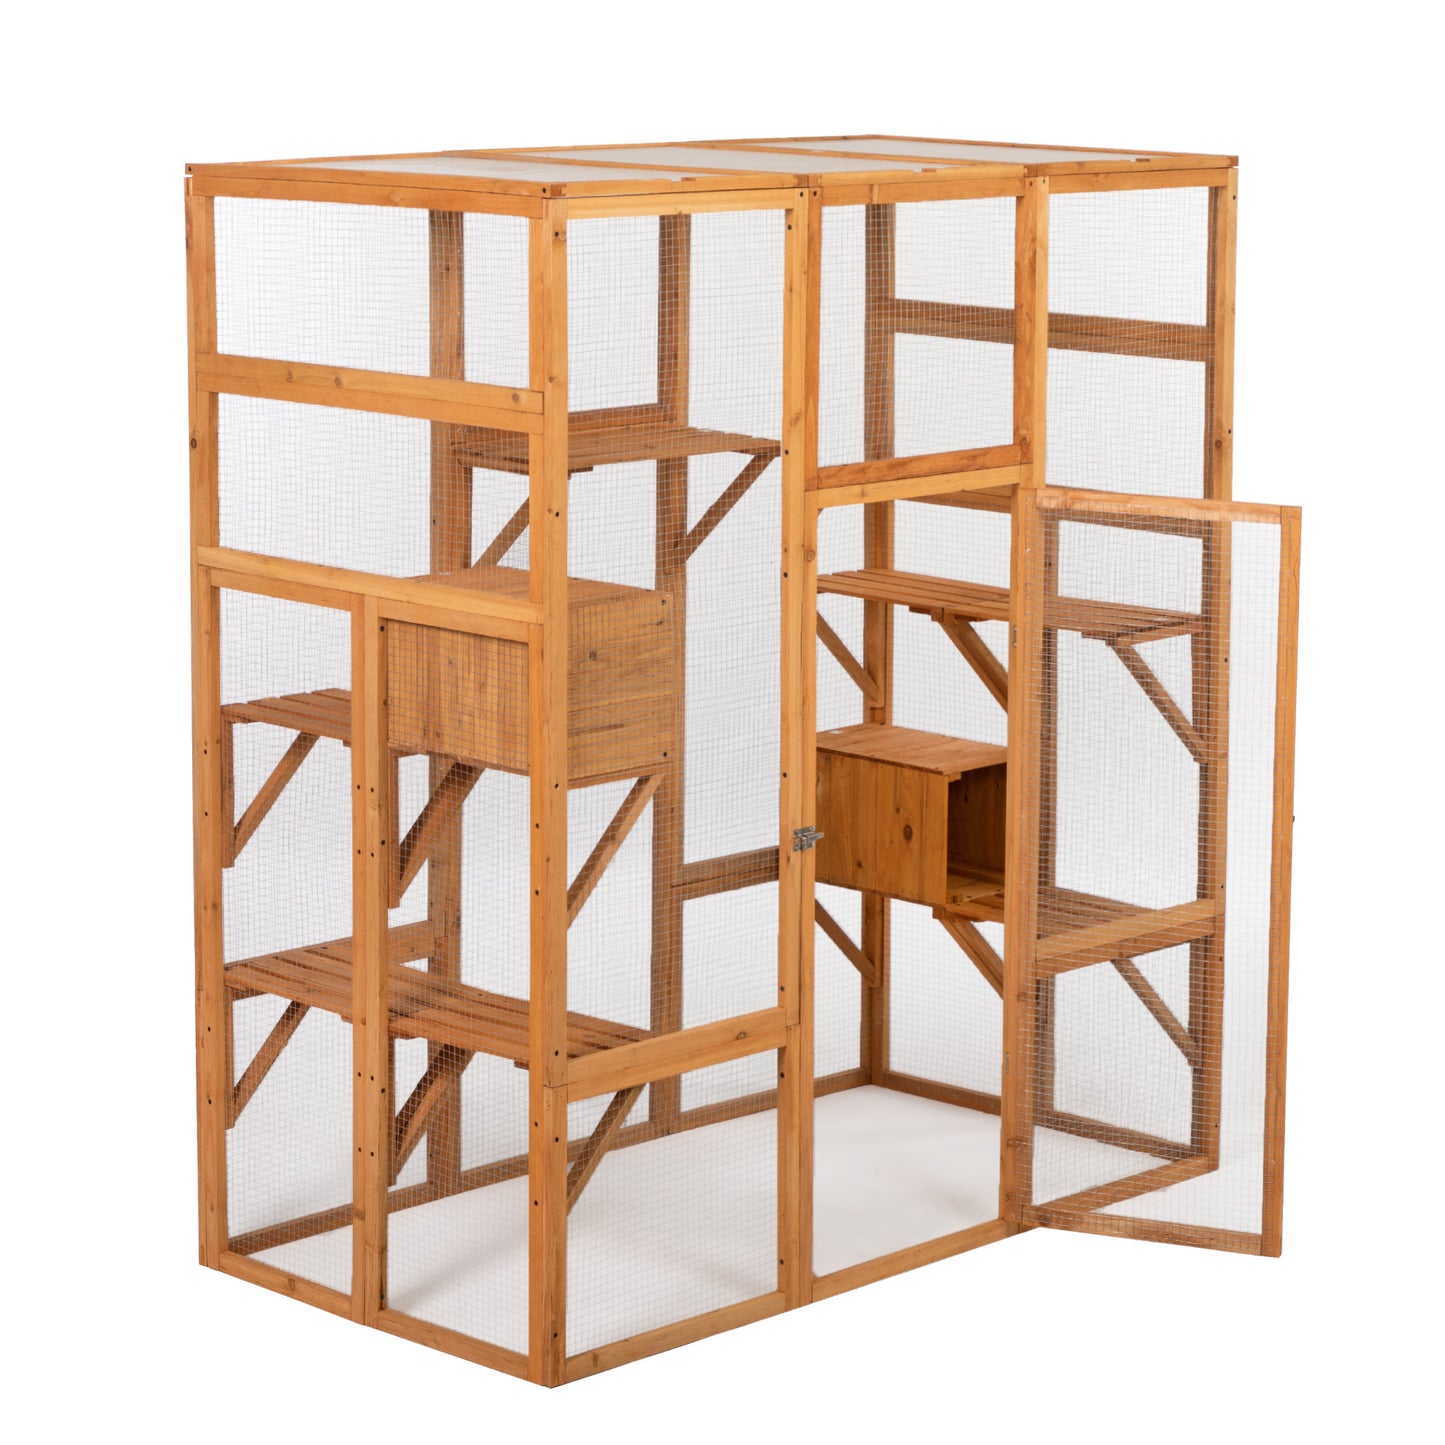 Outdoor Cat Enclosure, Large Wood Cat Cage with Sunlight Top Panel, Perches, Sleeping Boxes, Pet Playpen, Orange